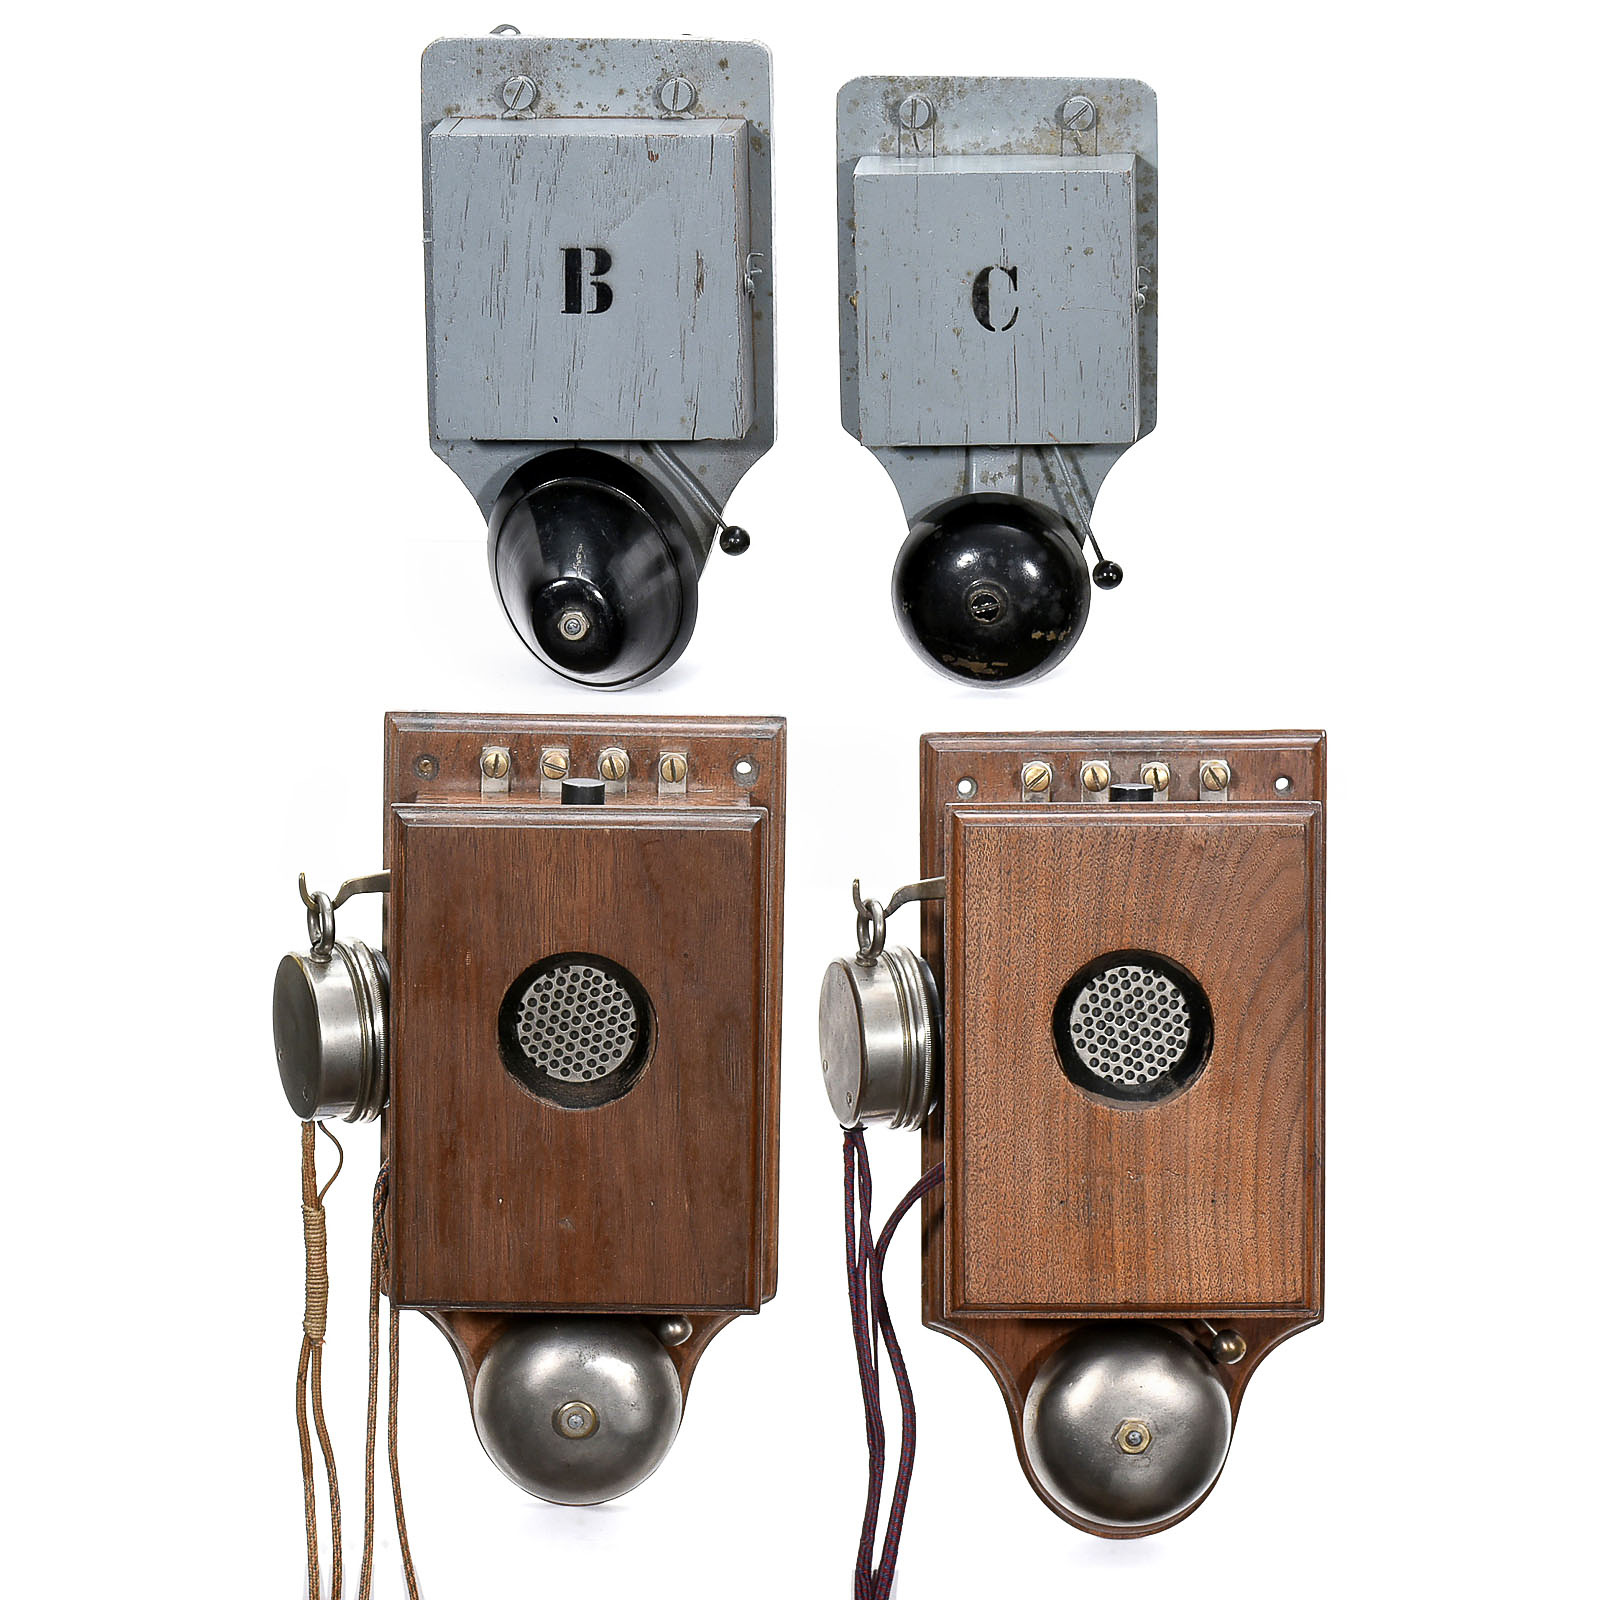 Intercom Telephone System, c. 1920  2 wall telephones, with switches, bells and earphones,